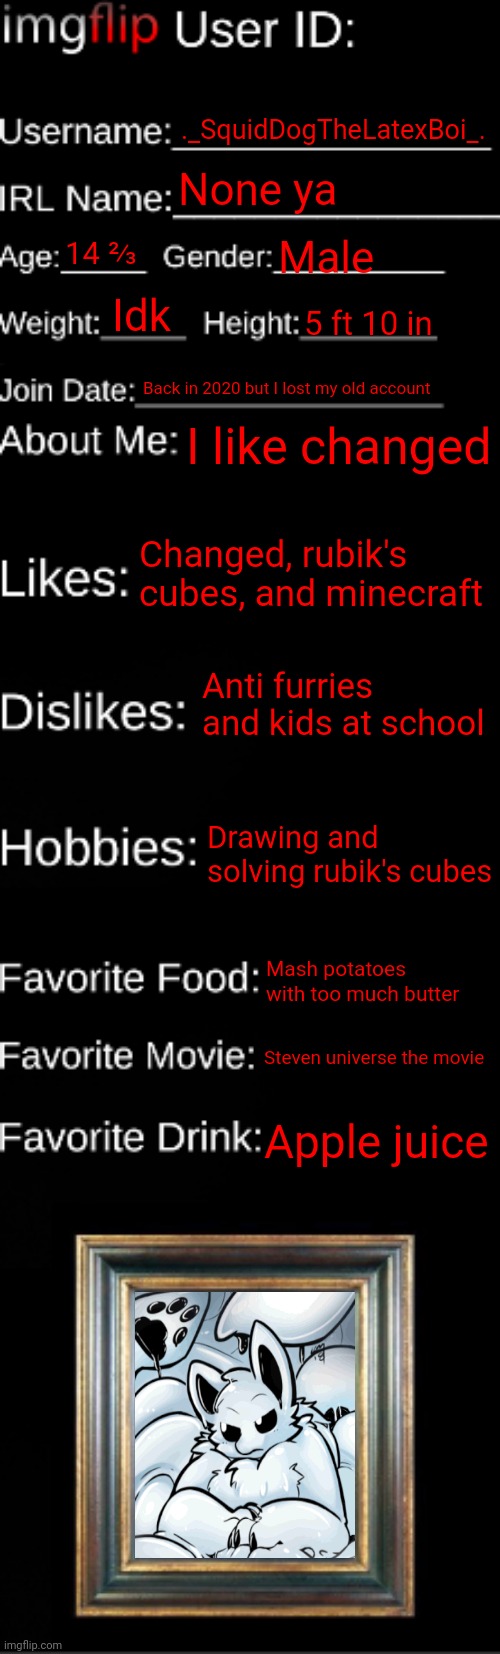 The image I had on my phone for years I forgot where it can from sorry | ._SquidDogTheLatexBoi_. None ya; 14 ⅔; Male; Idk; 5 ft 10 in; Back in 2020 but I lost my old account; I like changed; Changed, rubik's cubes, and minecraft; Anti furries and kids at school; Drawing and solving rubik's cubes; Mash potatoes with too much butter; Steven universe the movie; Apple juice | image tagged in imgflip id card | made w/ Imgflip meme maker